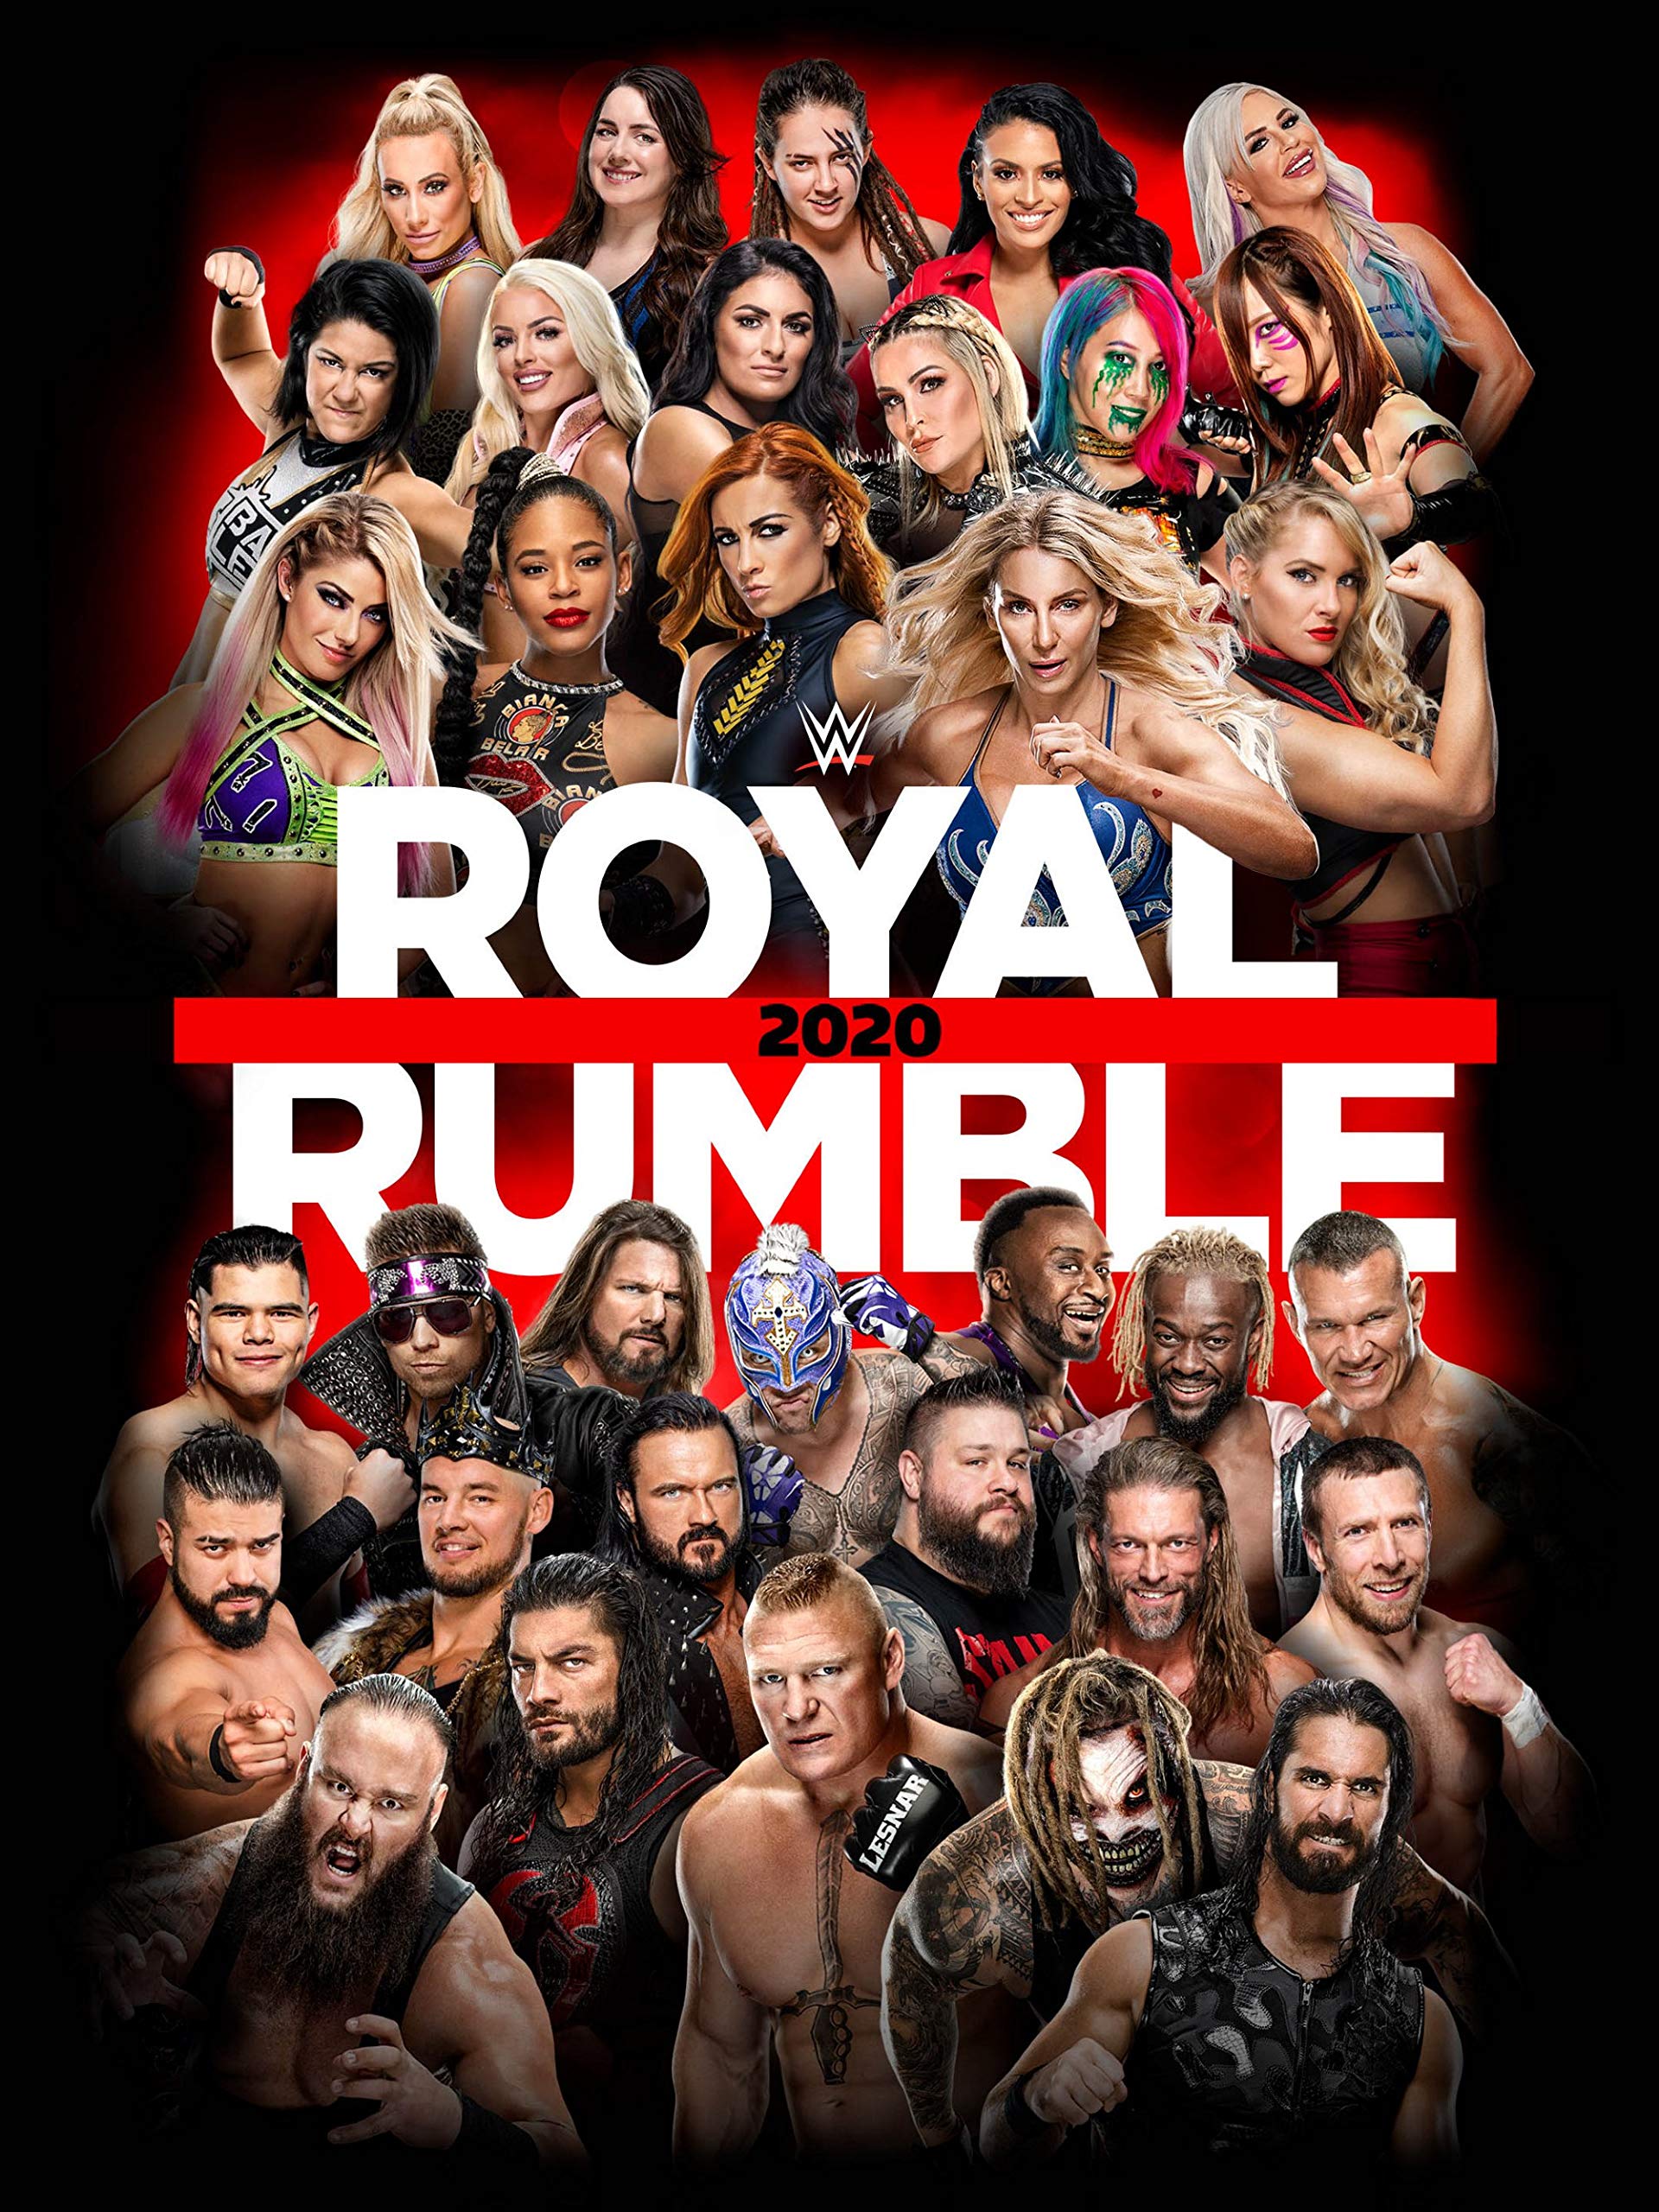 Wwe Royale Rumble Full Collection 1988 To 2020 To Present 17611 Poster.jpg